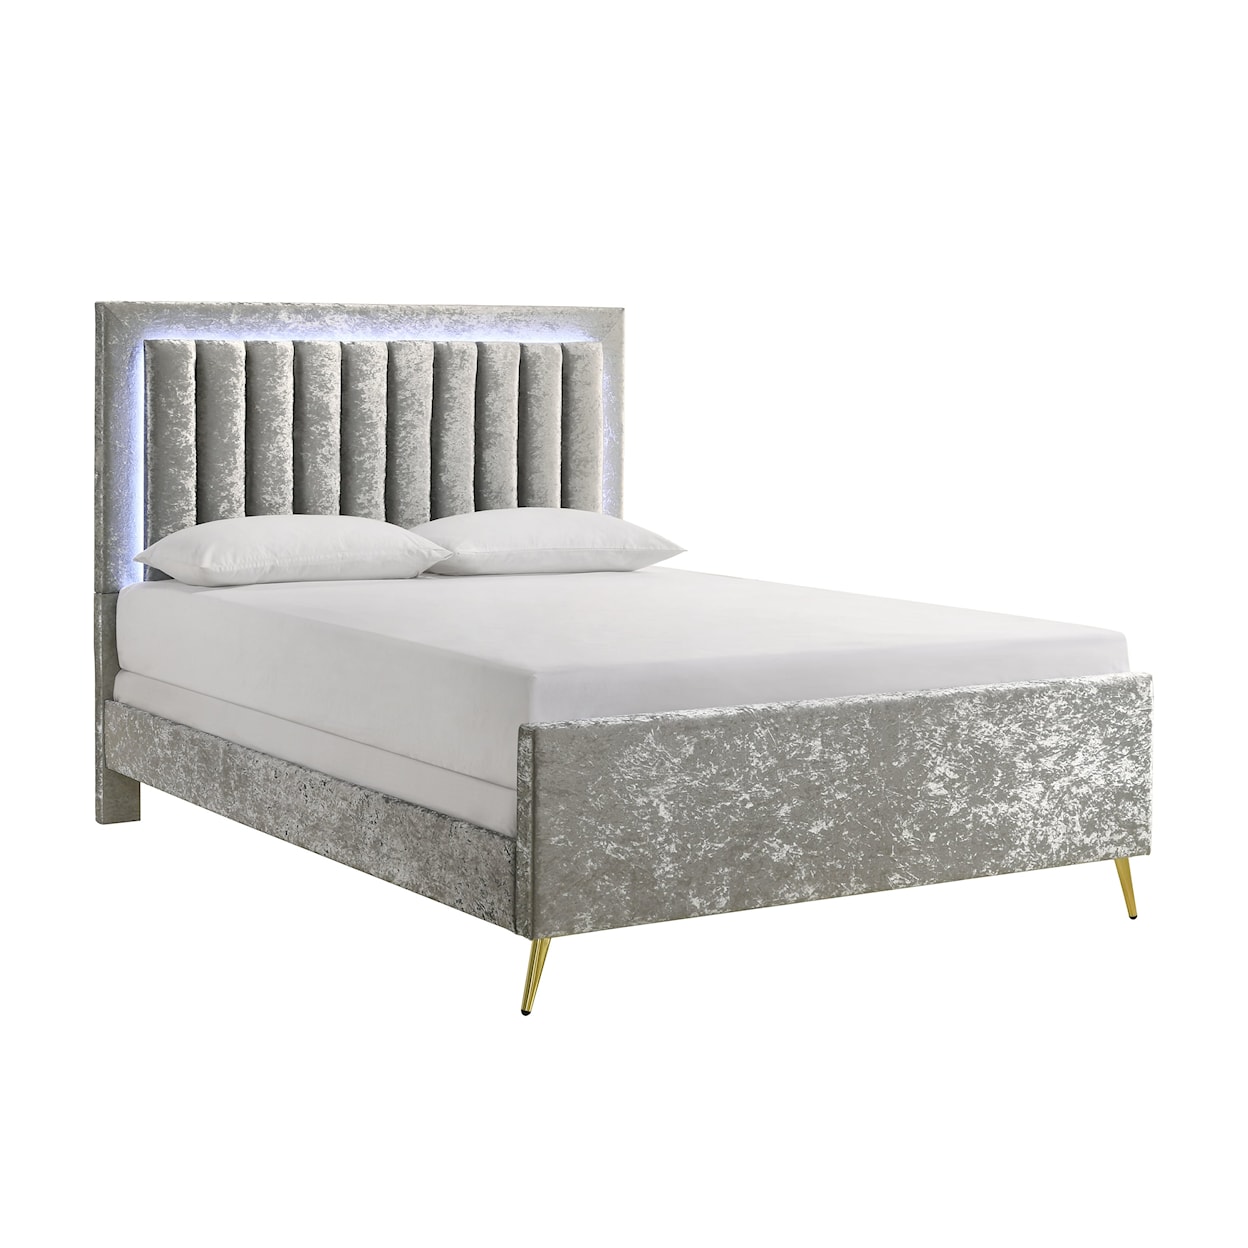 Crown Mark Krushed Silver KRUSHED SILVER LIGHT UP KING BED |